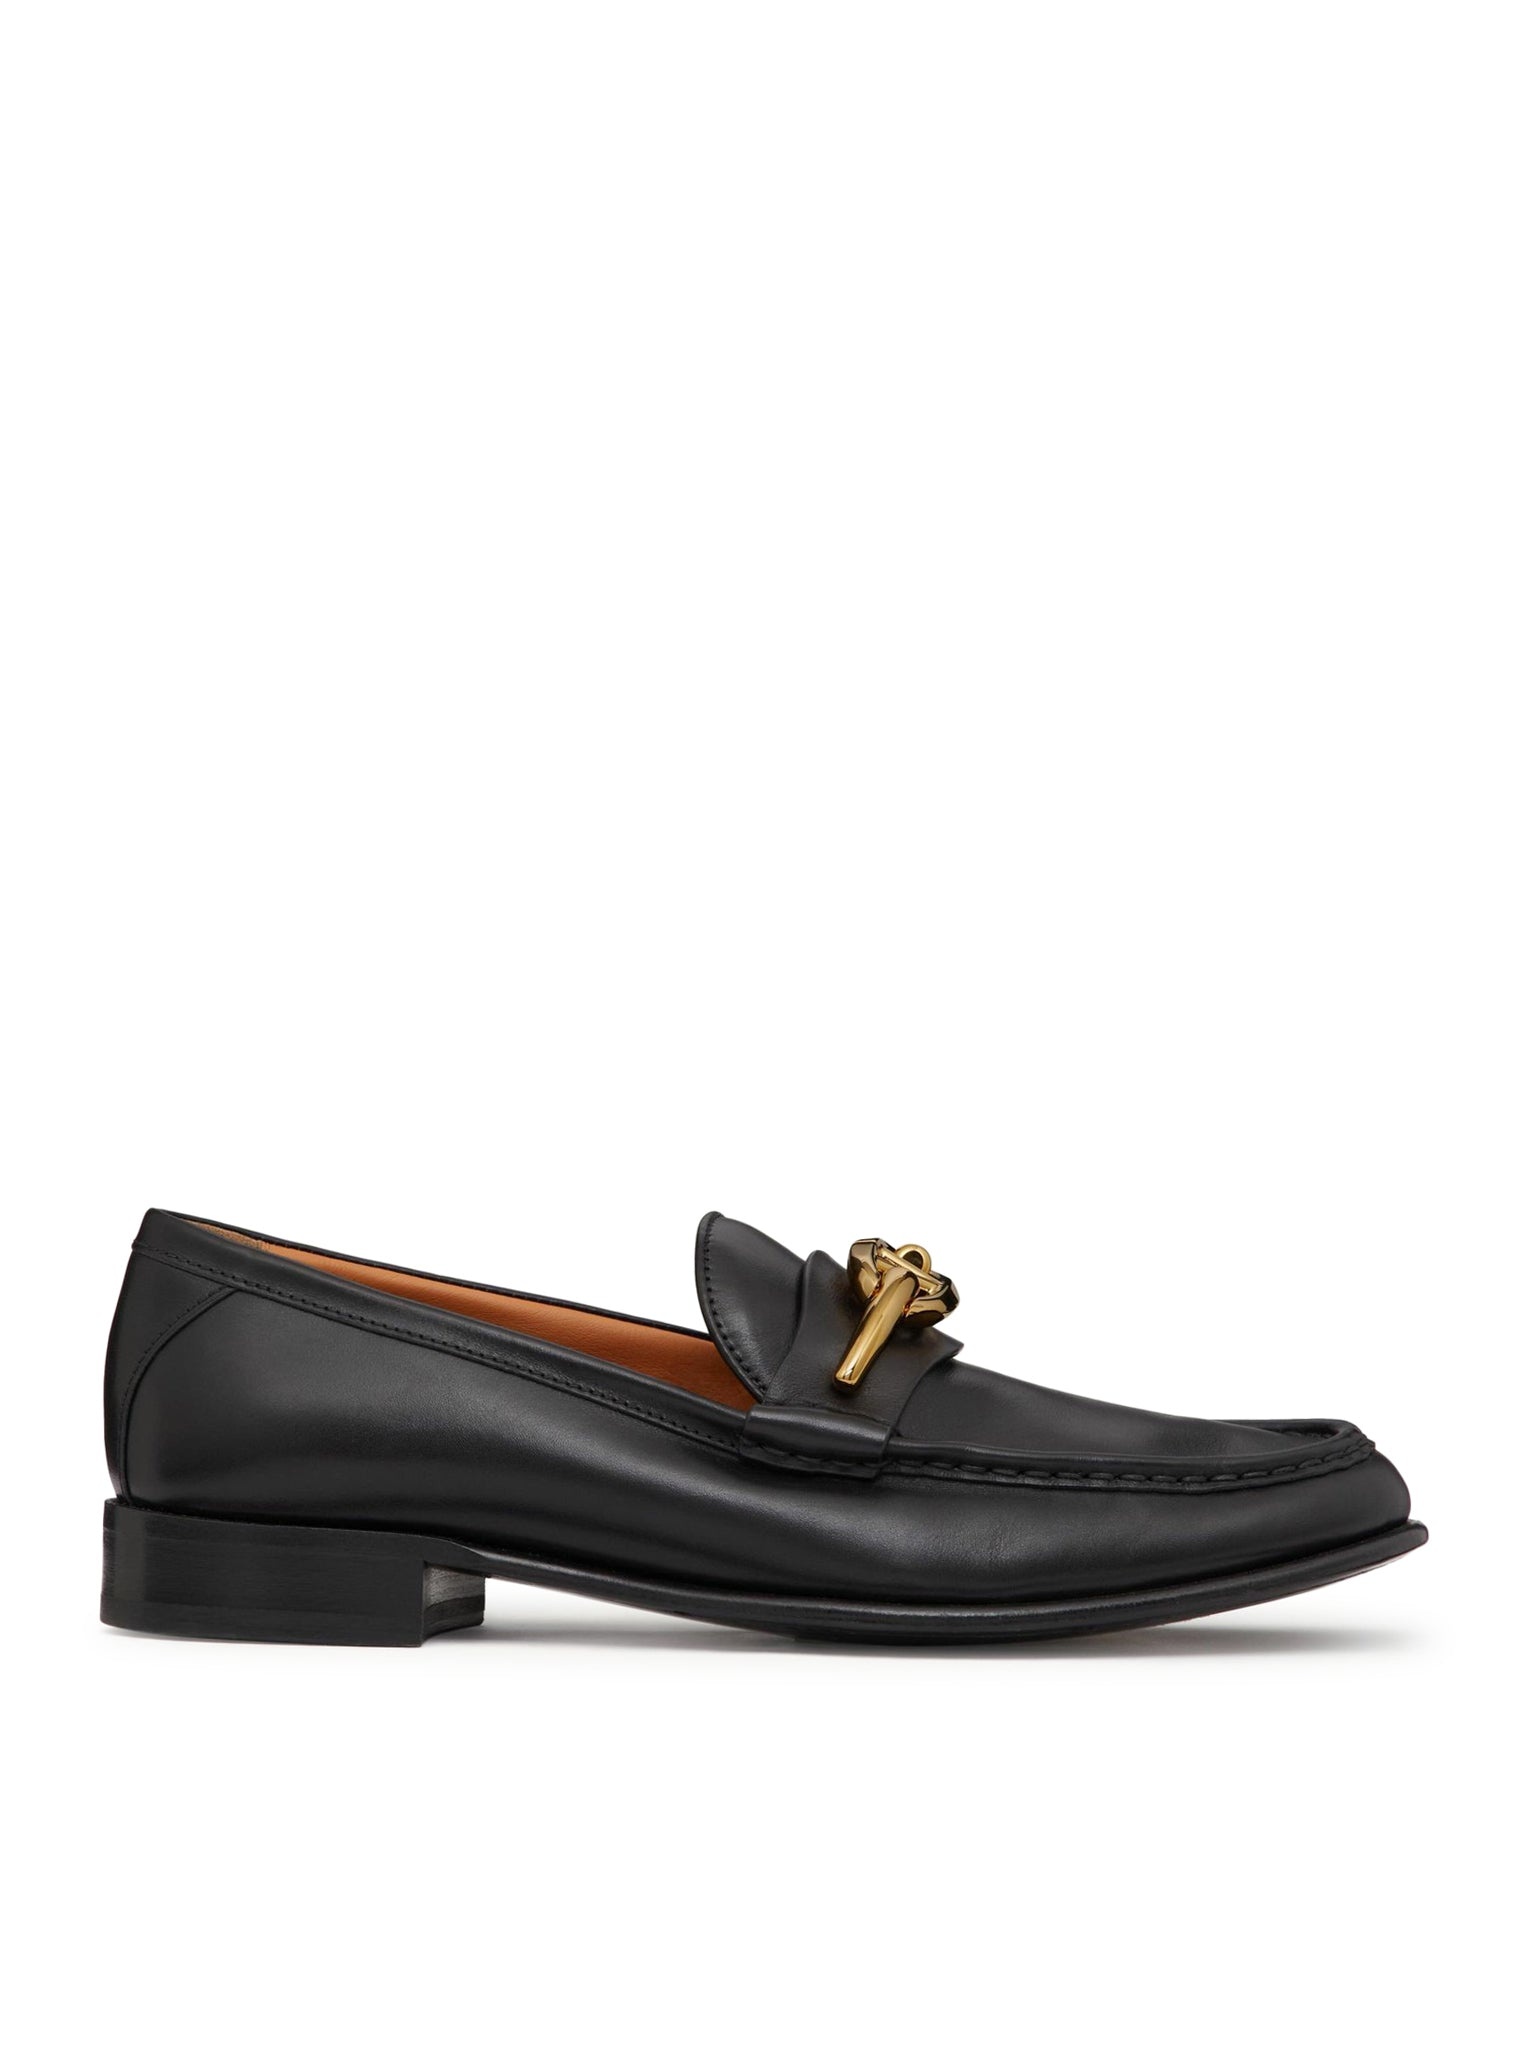 VLOGO THE BOLD EDITION LOAFERS IN CALFSKIN - 1